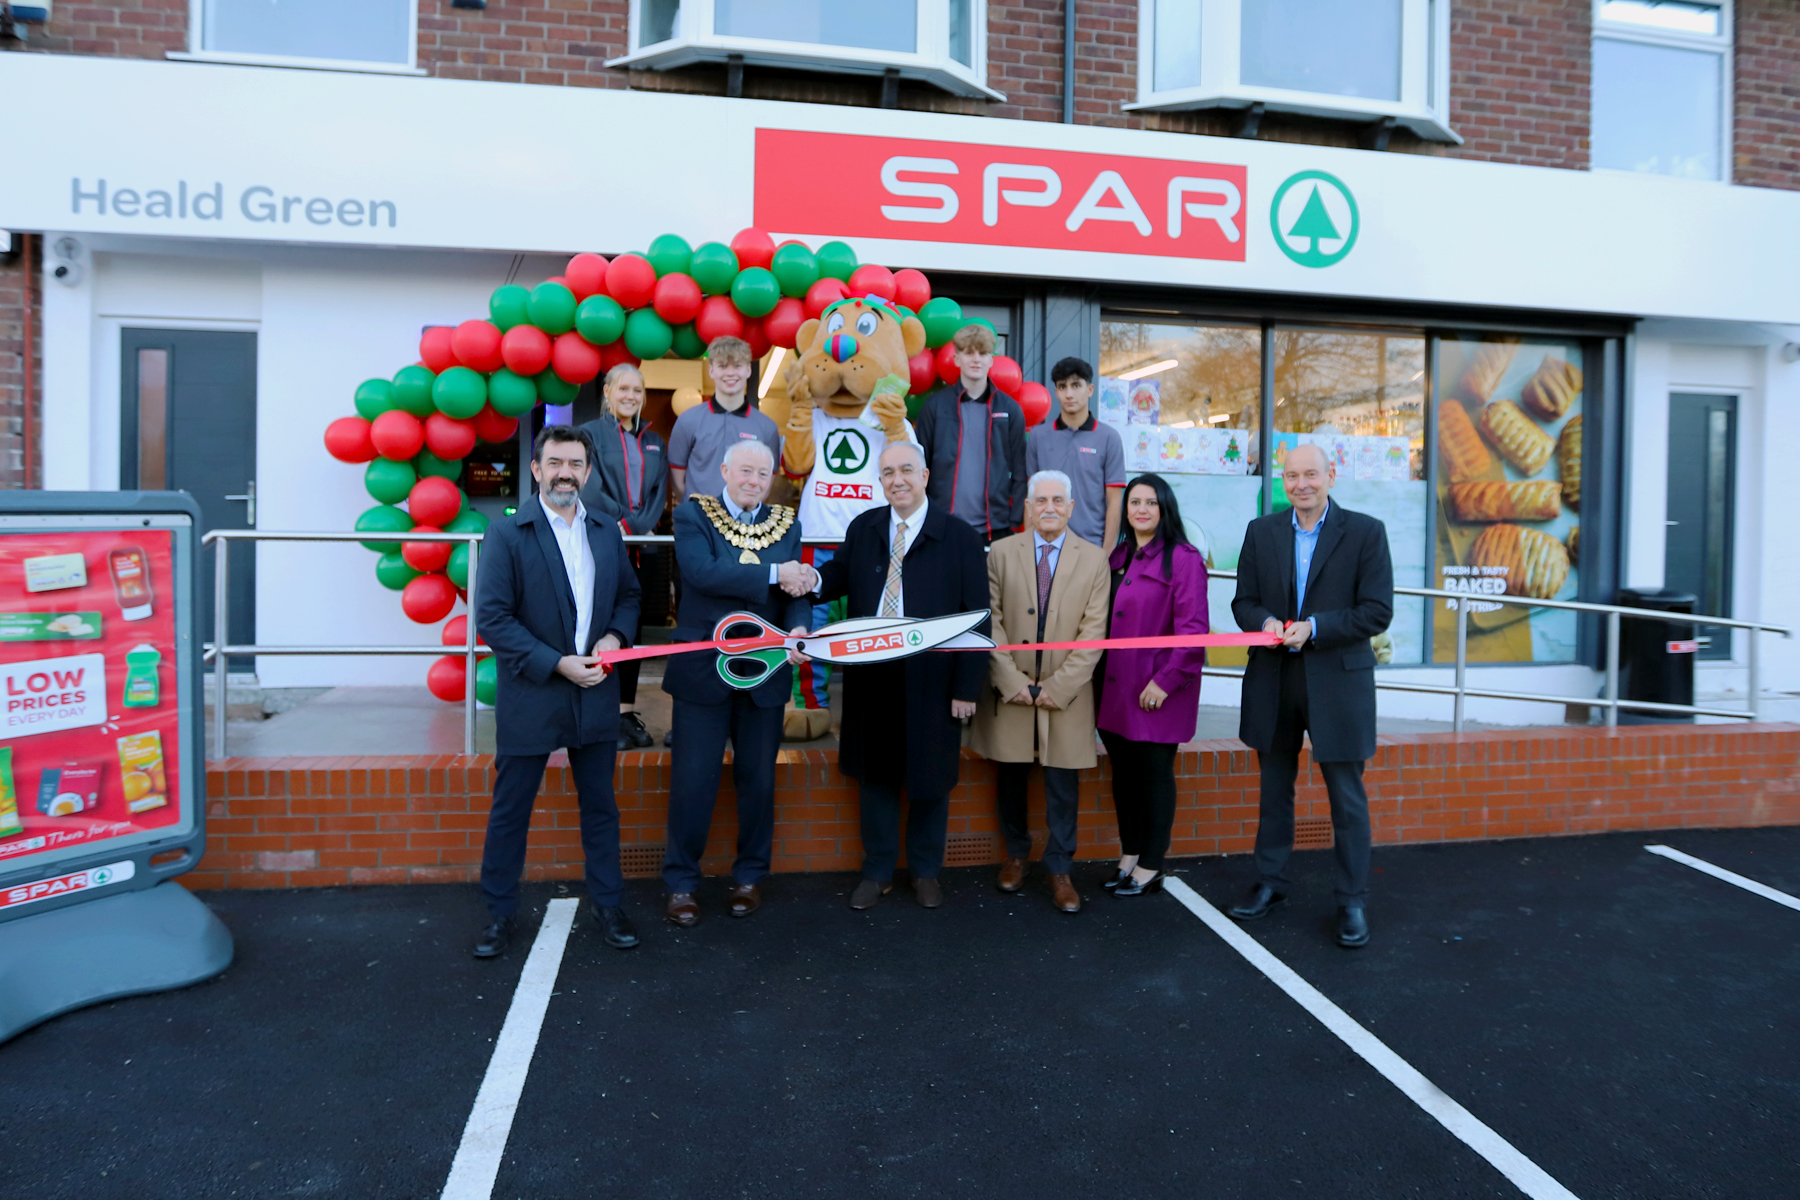 New indie launches SPAR store in Heald Green